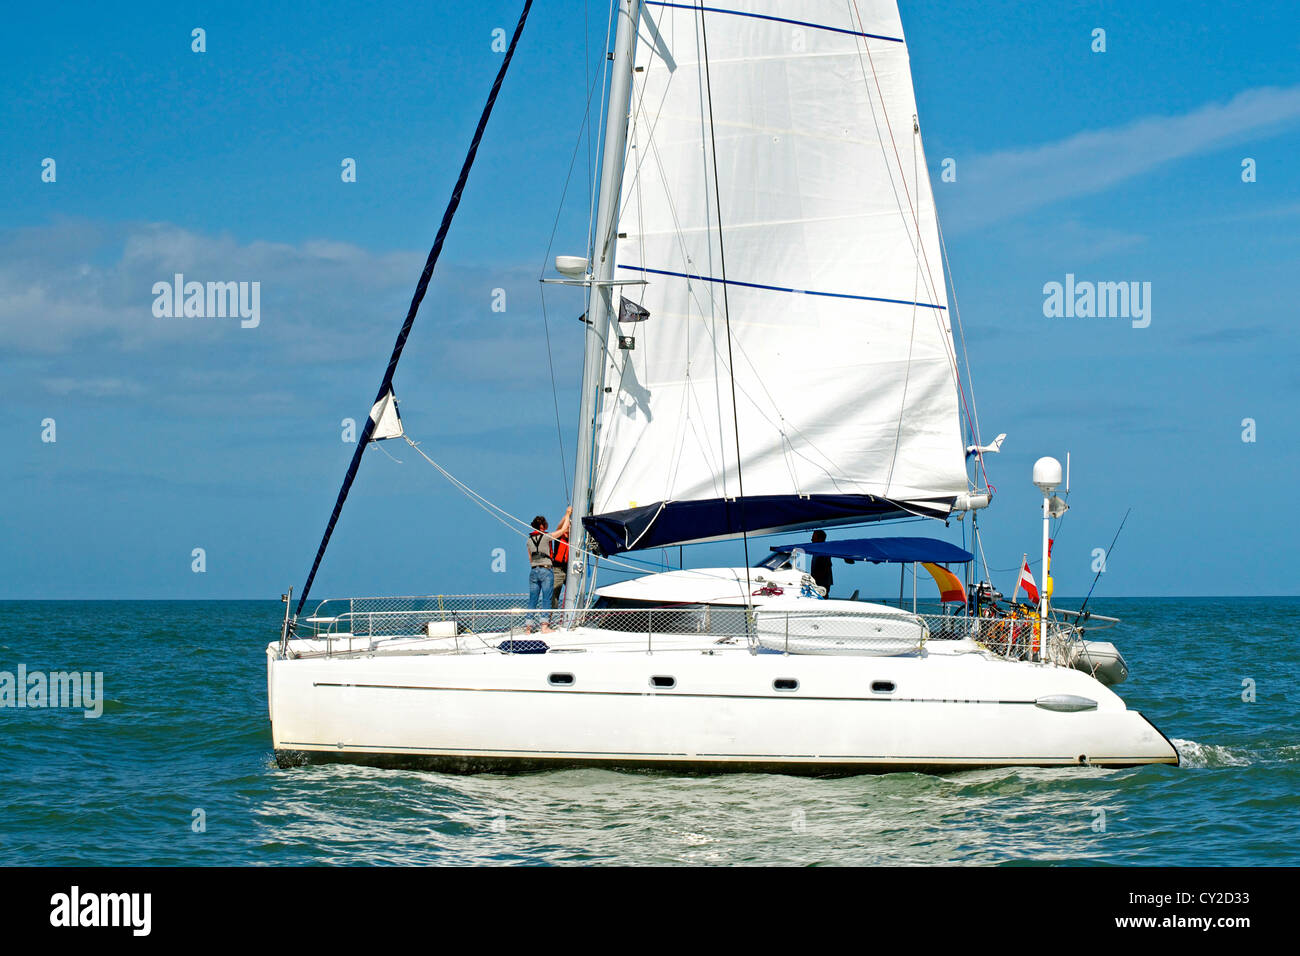 Luxury white catamaran boat in the ocean with blue sky Stock Photo - Alamy